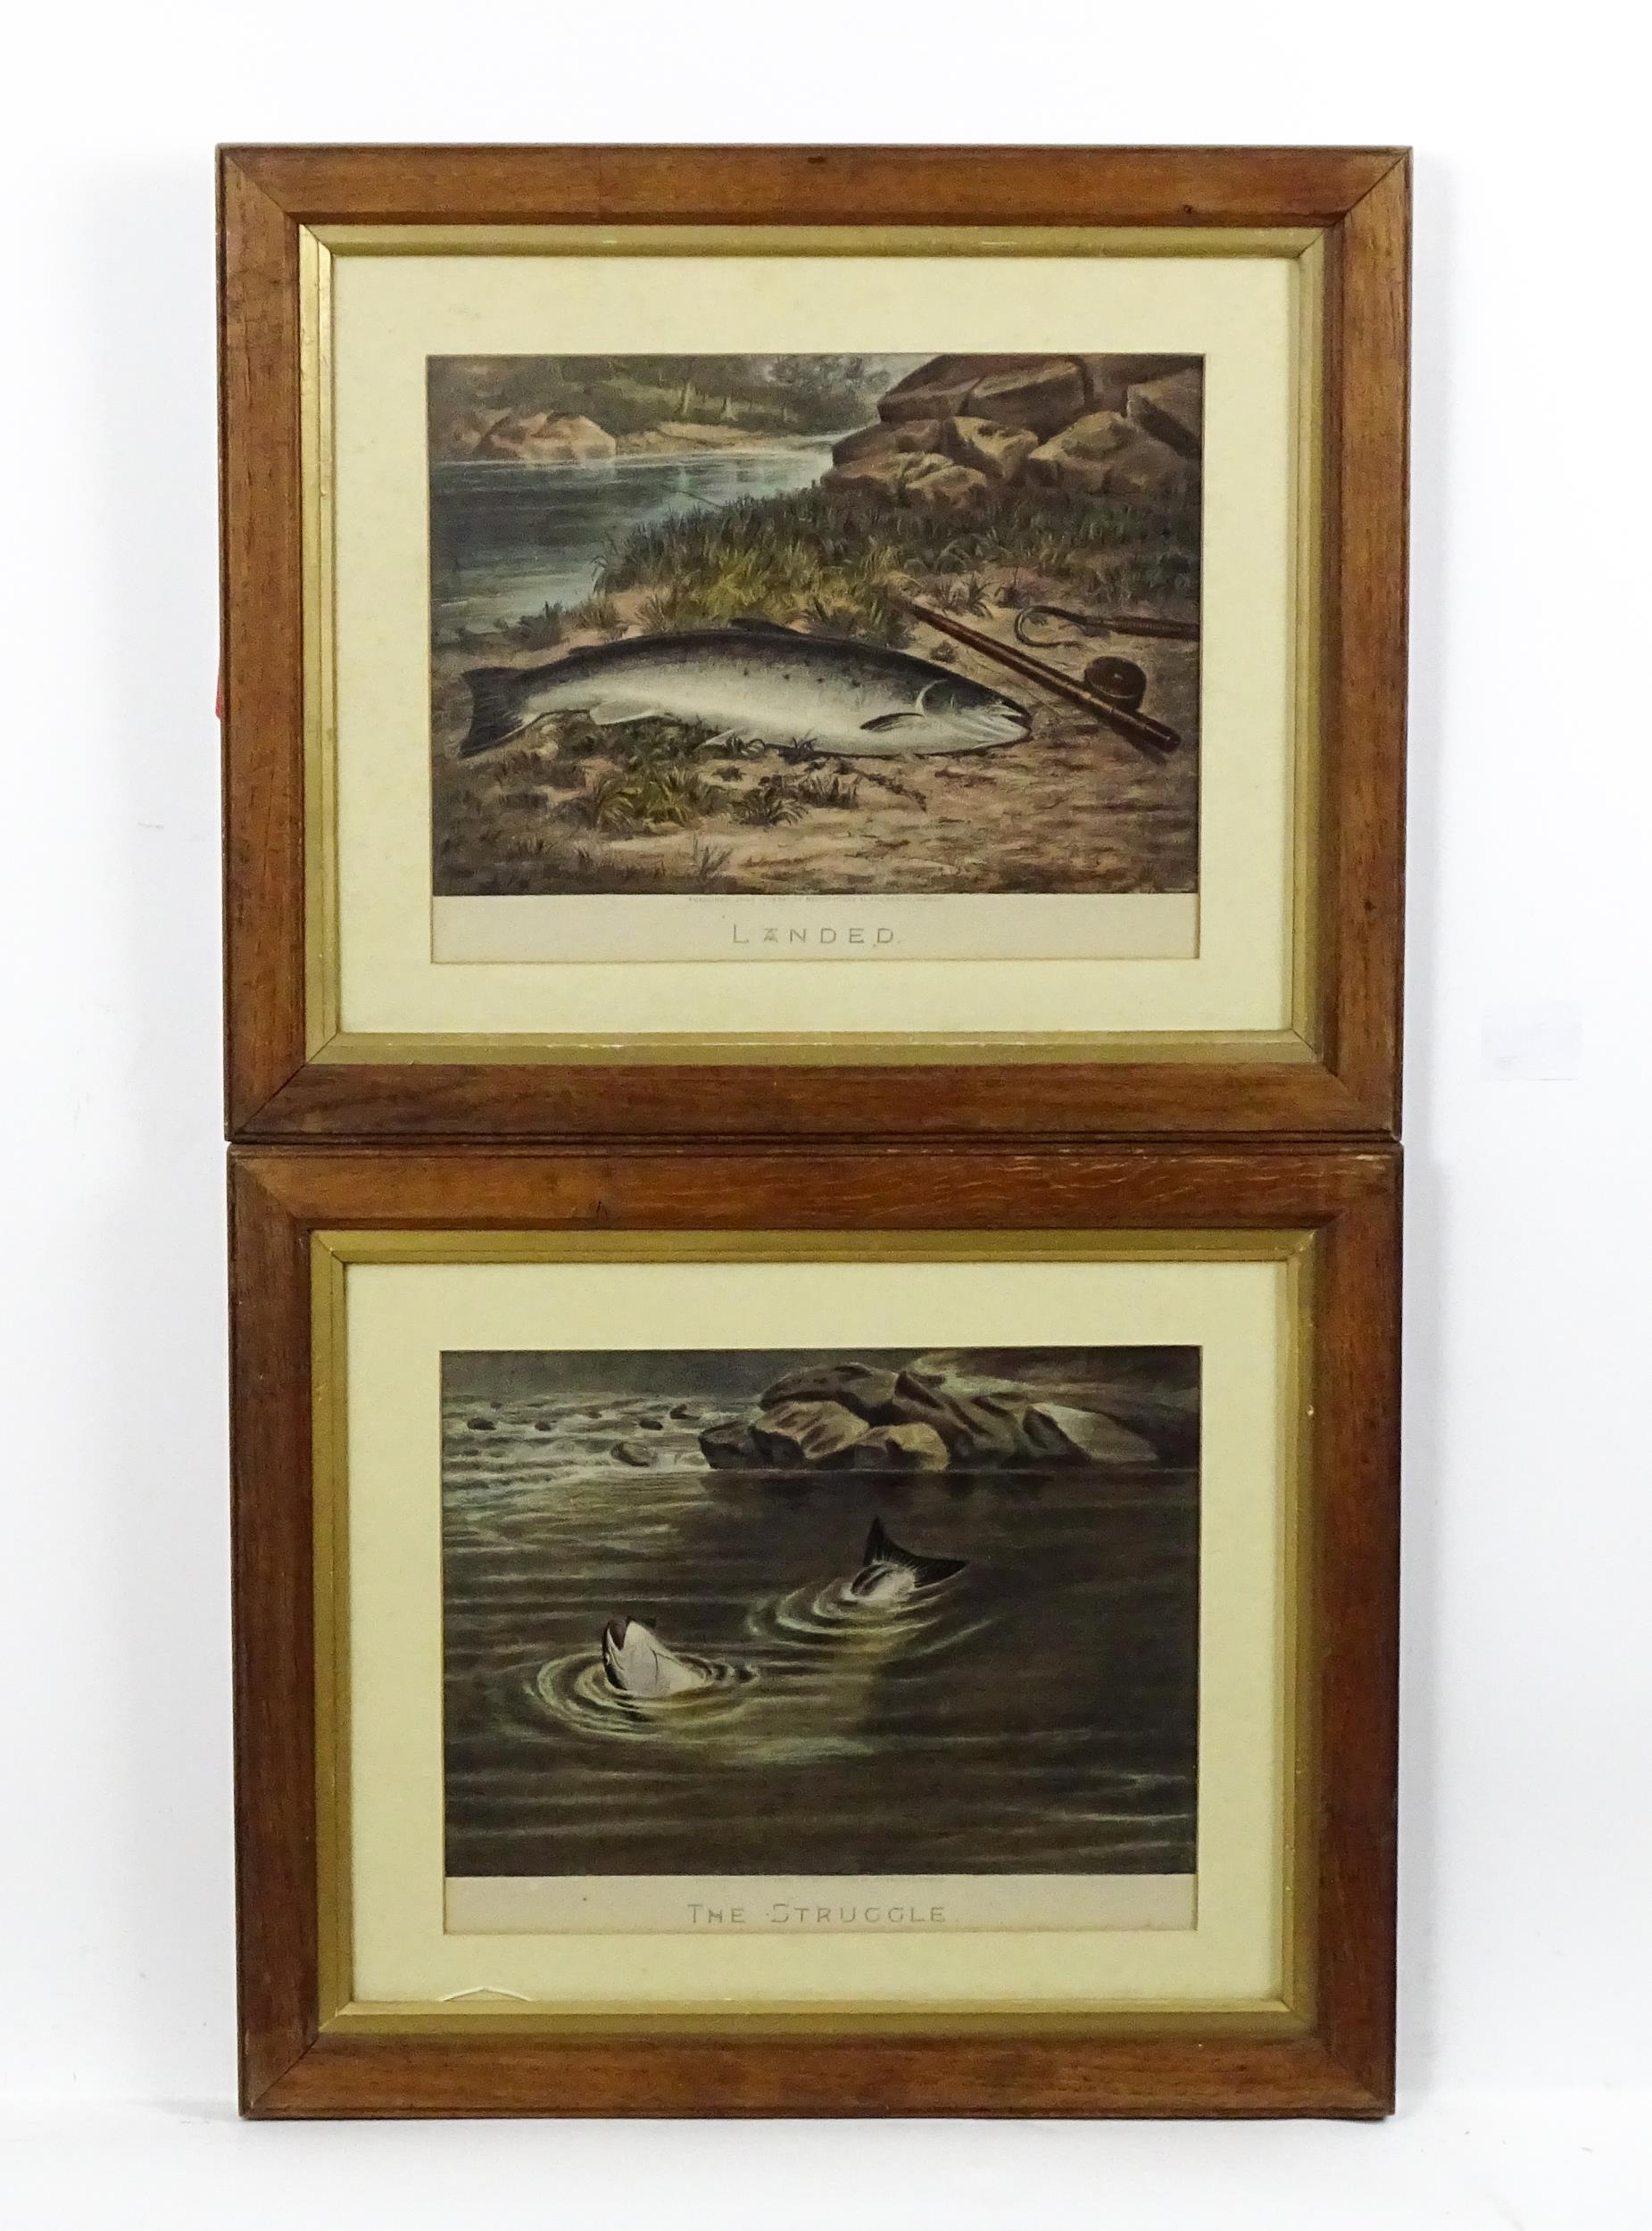 After Walter M. Brackett, 19th century, Lithographs with hand colouring, Two fishing engravings - Image 3 of 7